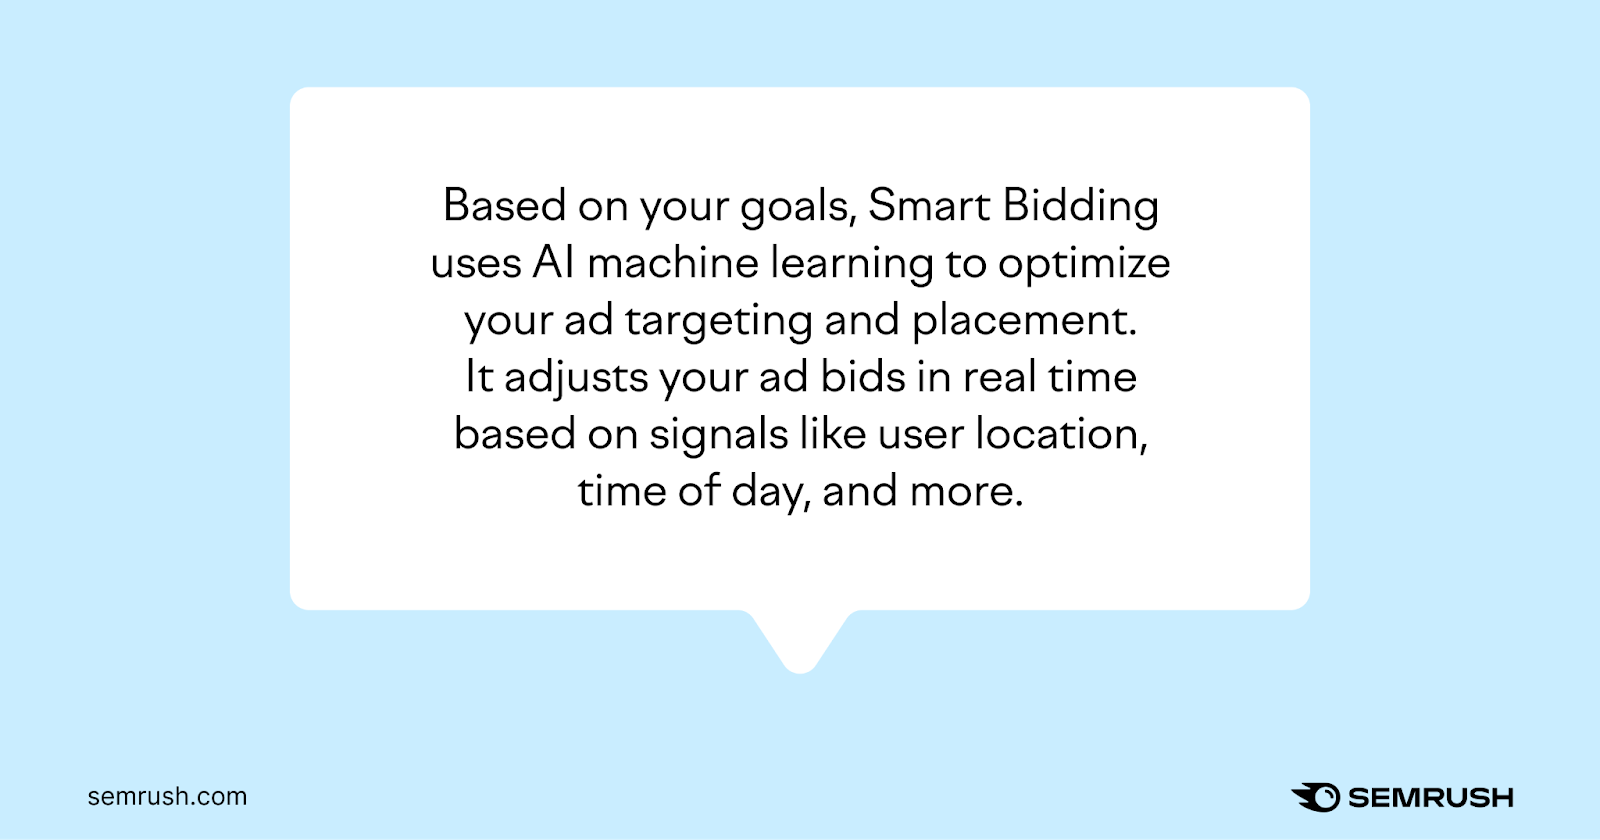 Based on your goals, Smart Bidding uses AI machine learning to optimize your ad targeting and placement. It adjusts your ad bids in real time based on signals like user location, time of day, and more.